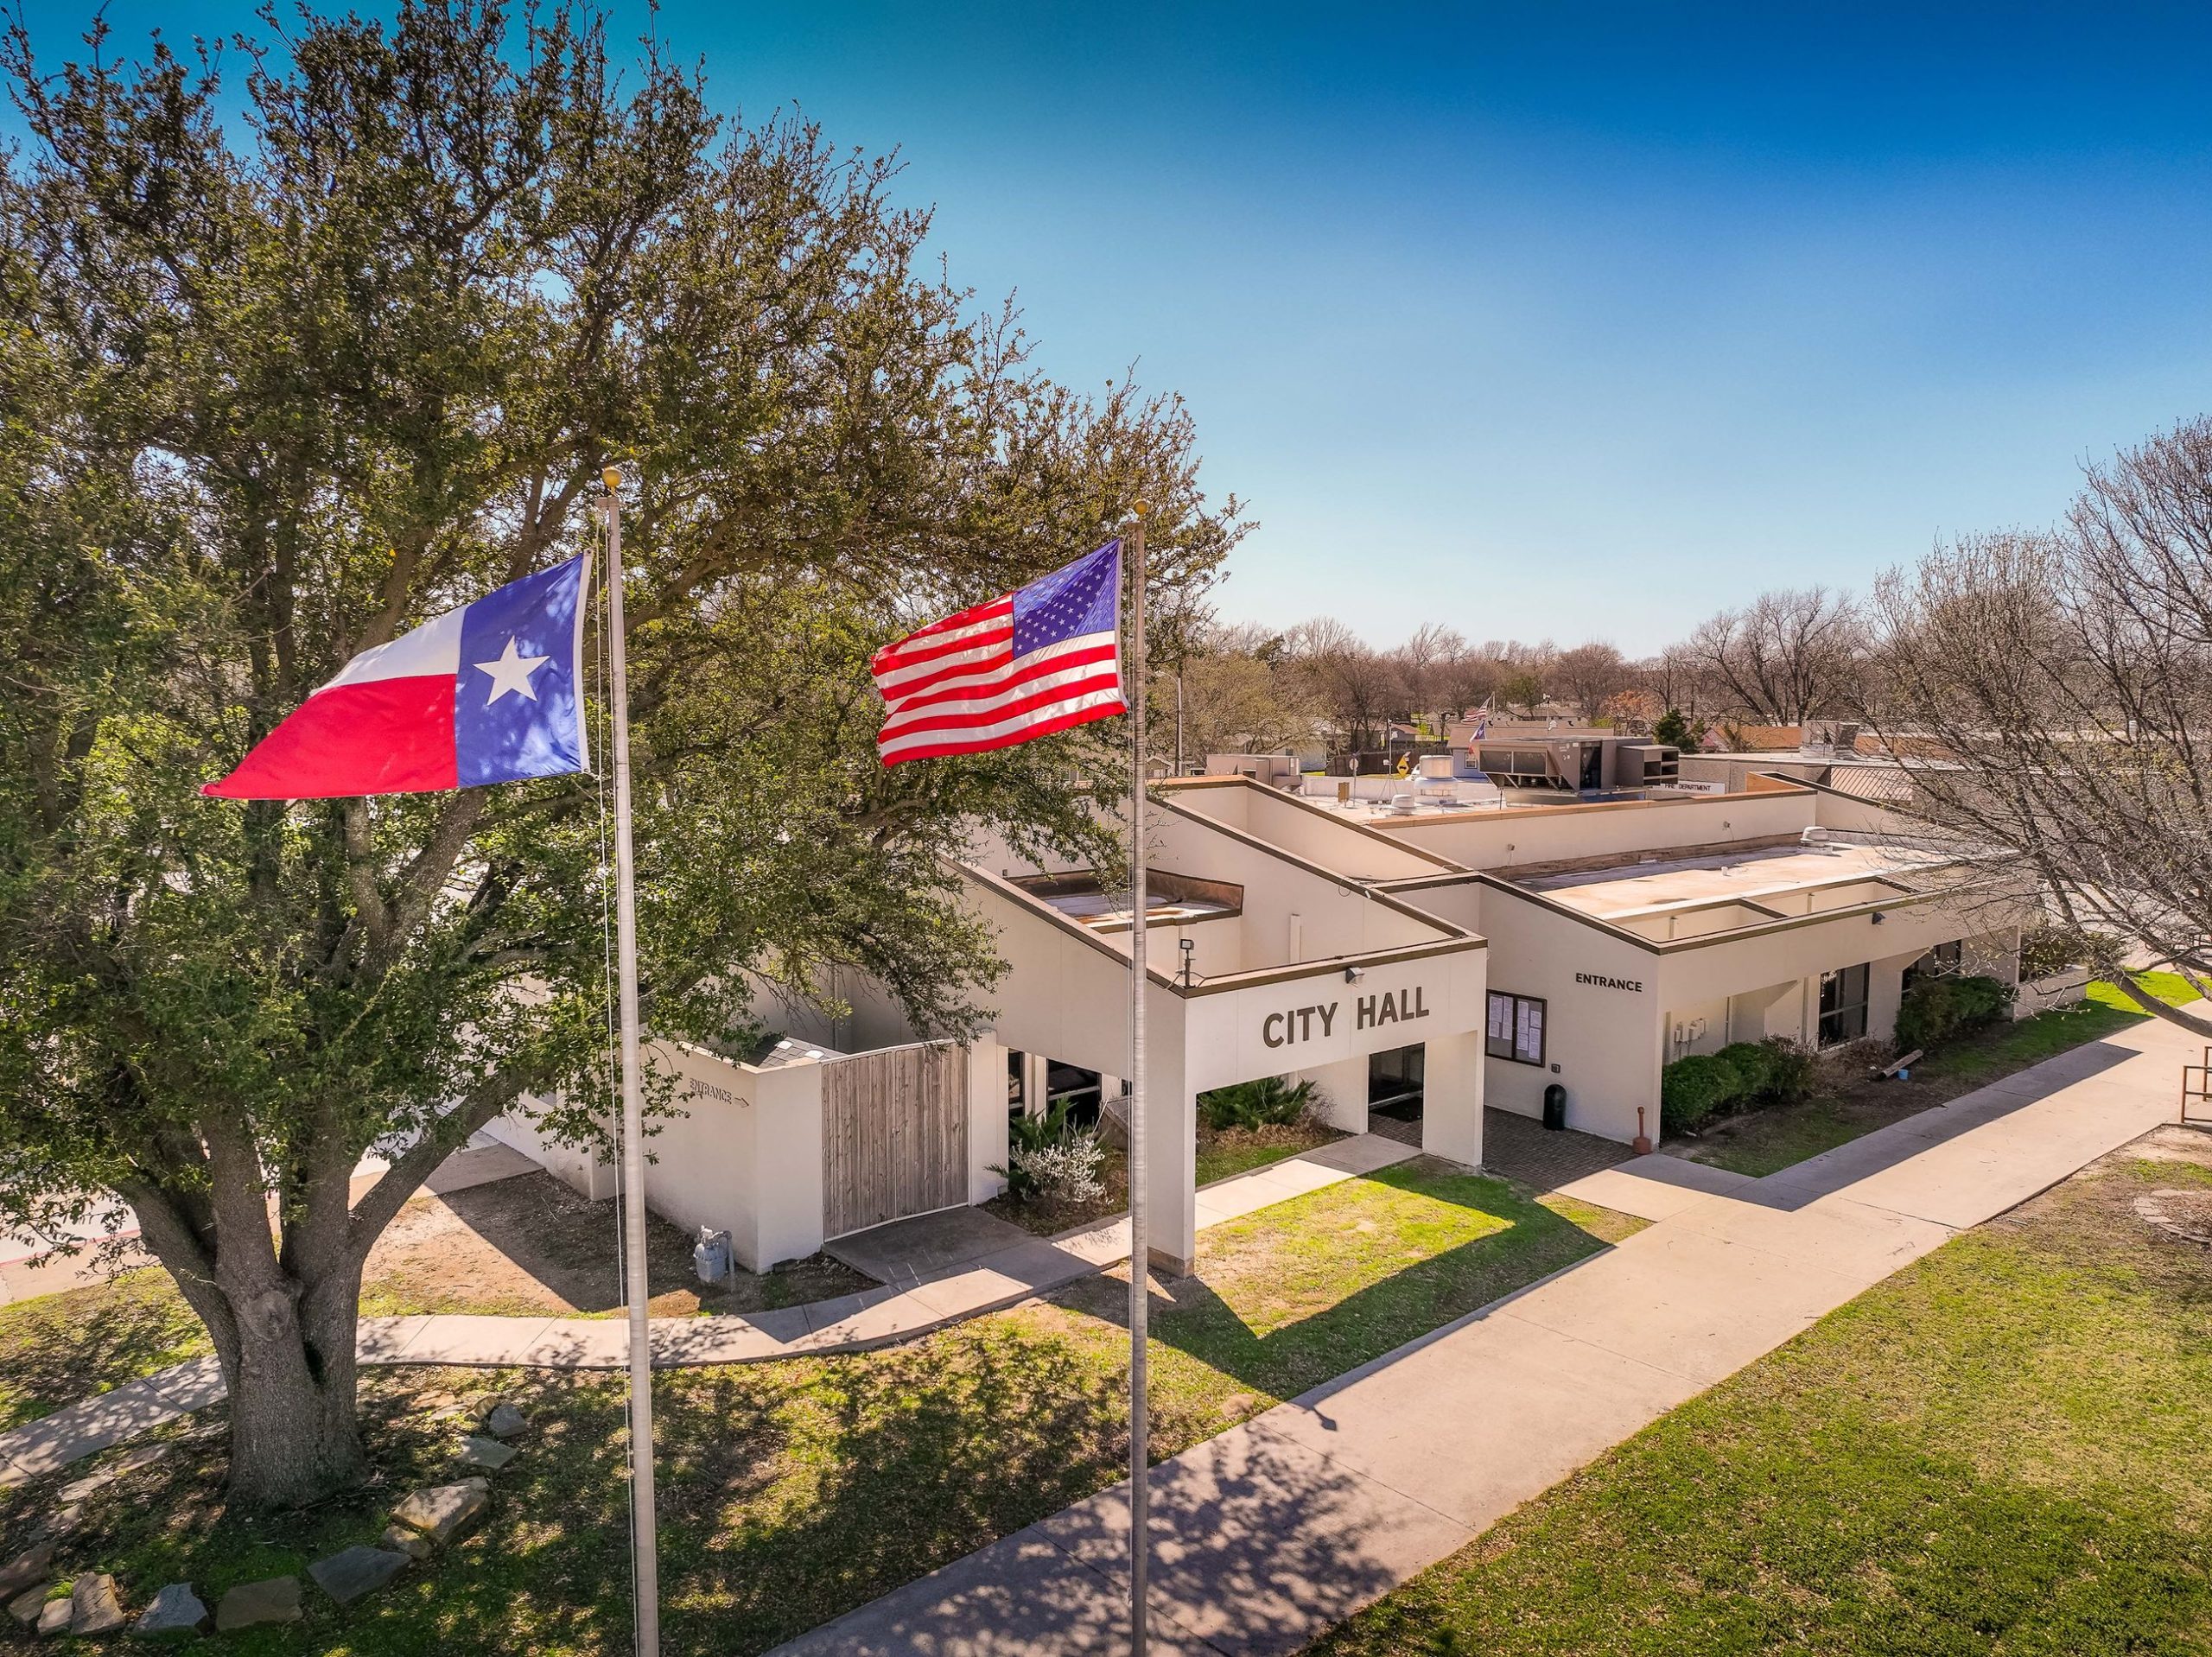 city hall in White Settlement, Texas with two flags raised